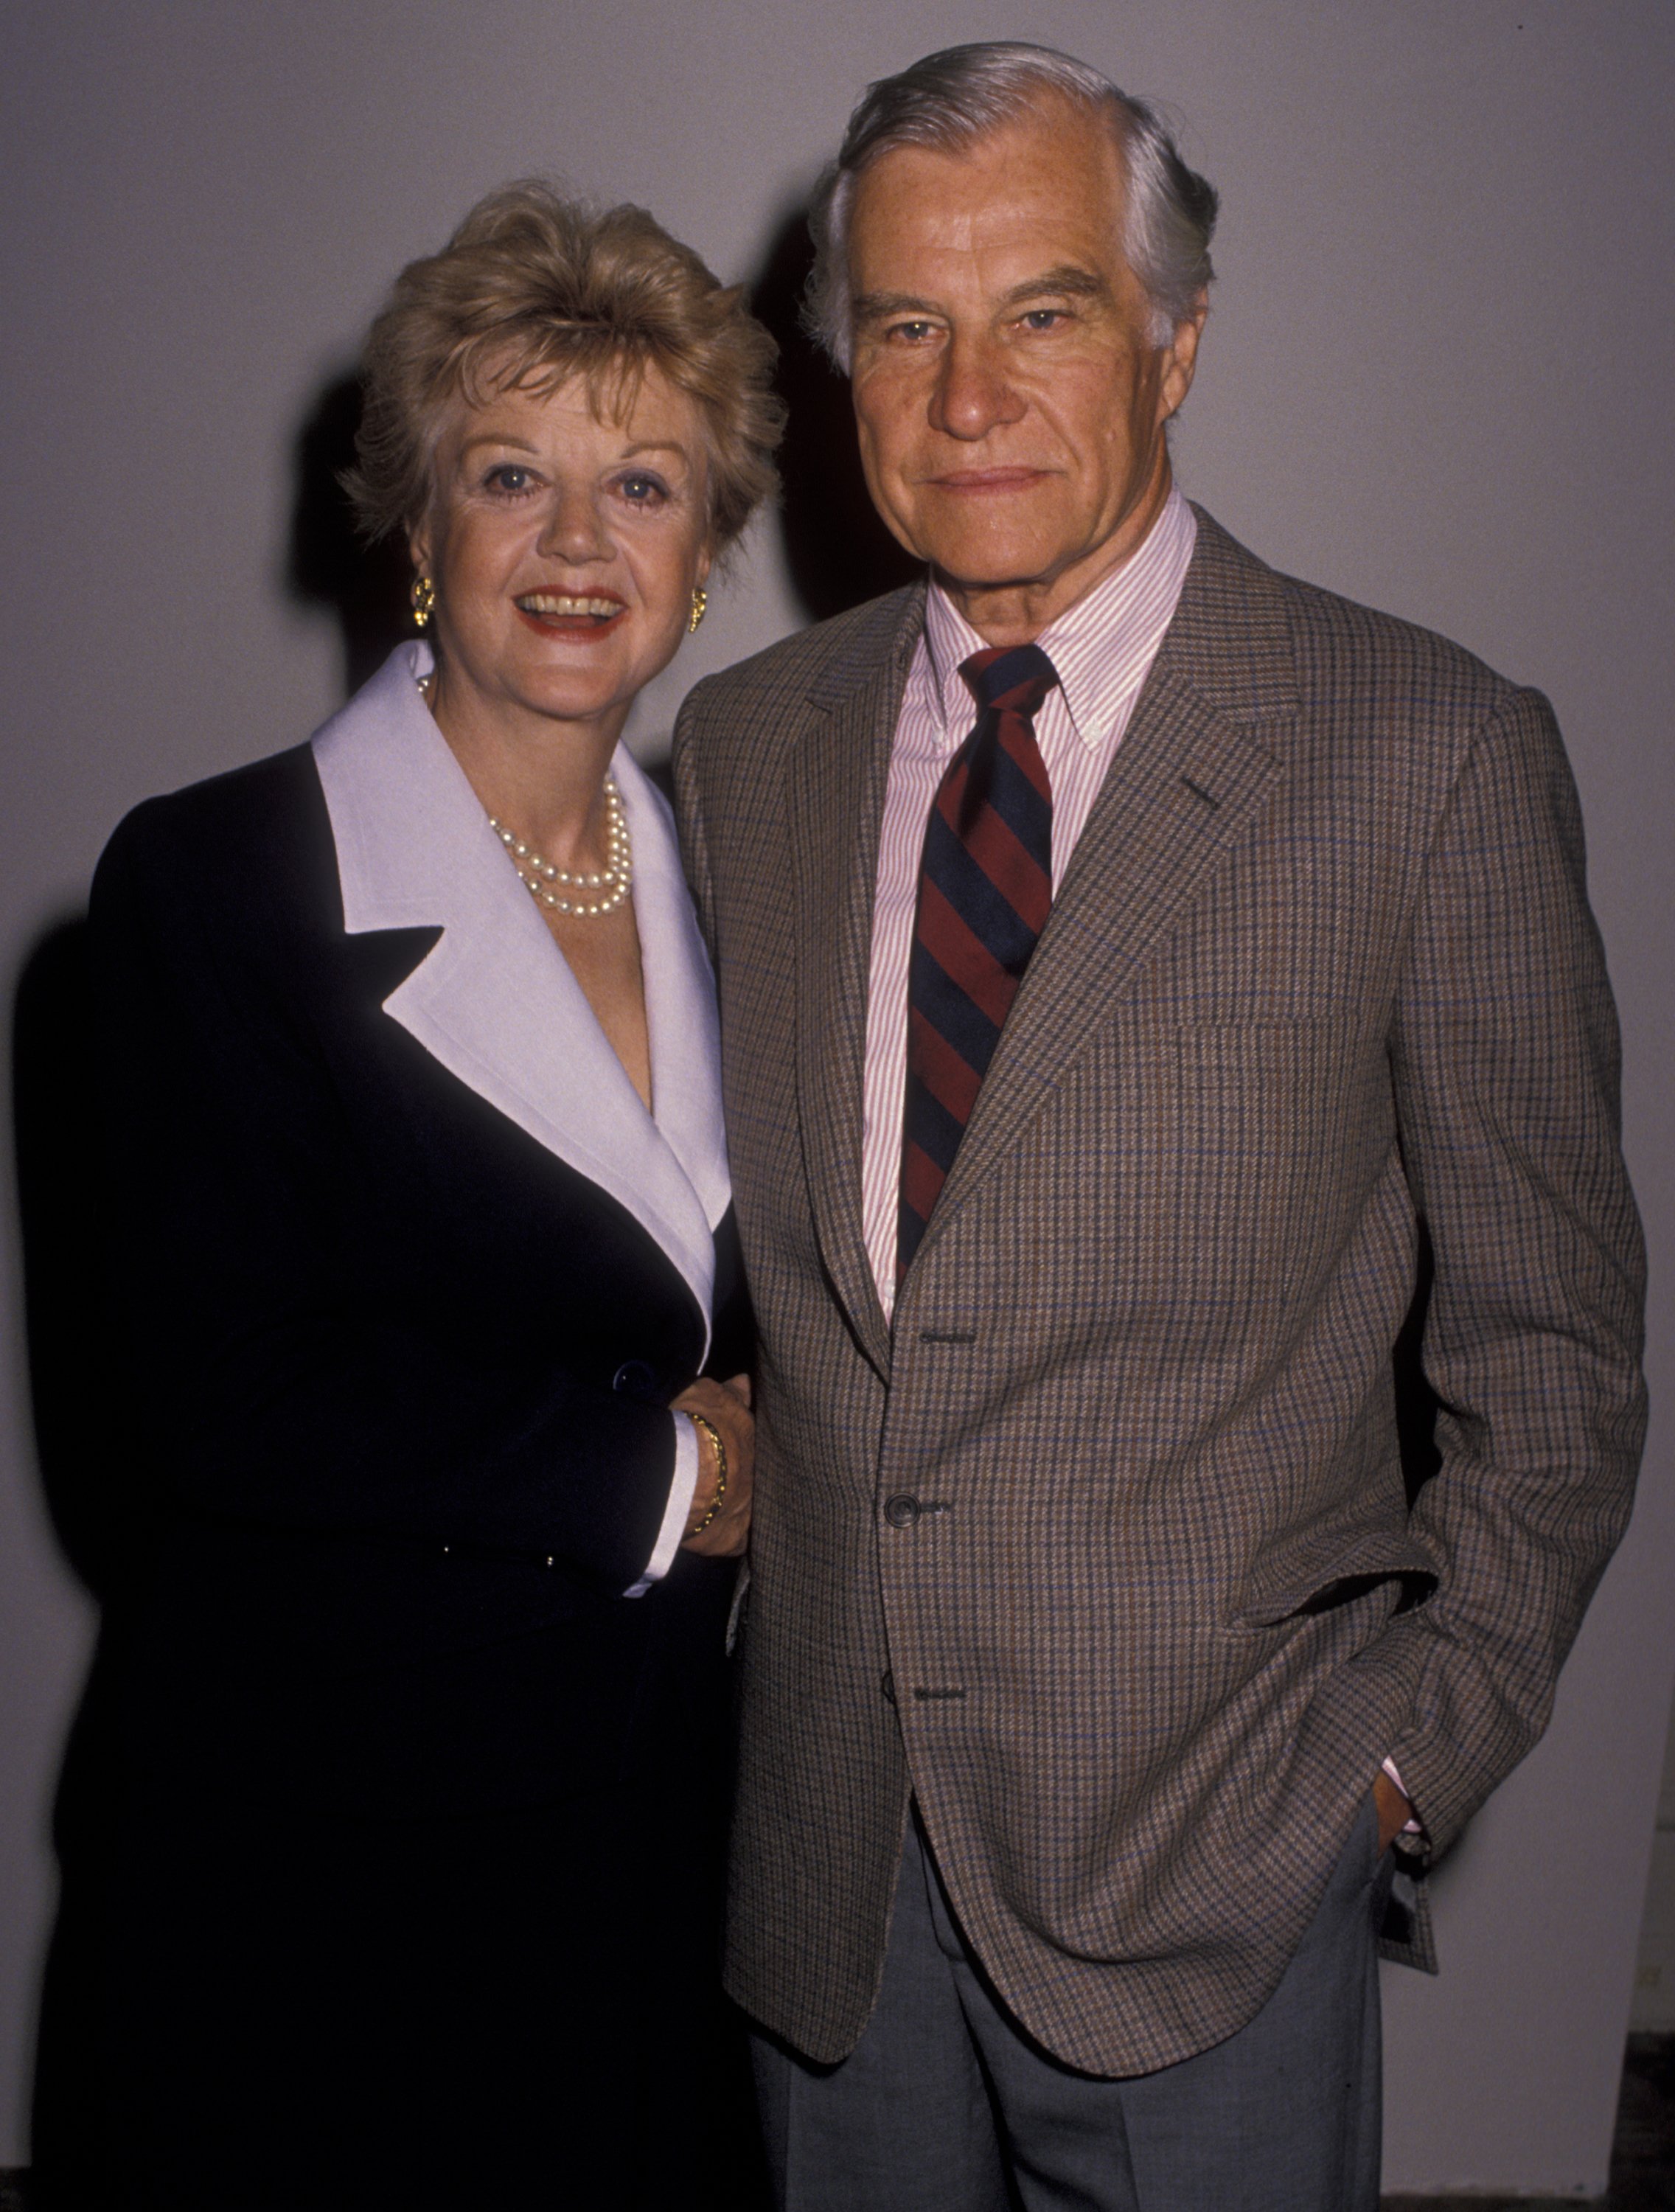 Angela Lansbury and her husband Peter Shaw at the Mother of The Year Awards Luncheon on May 4, 1990, in Beverly Hills, California | Source: Getty Images